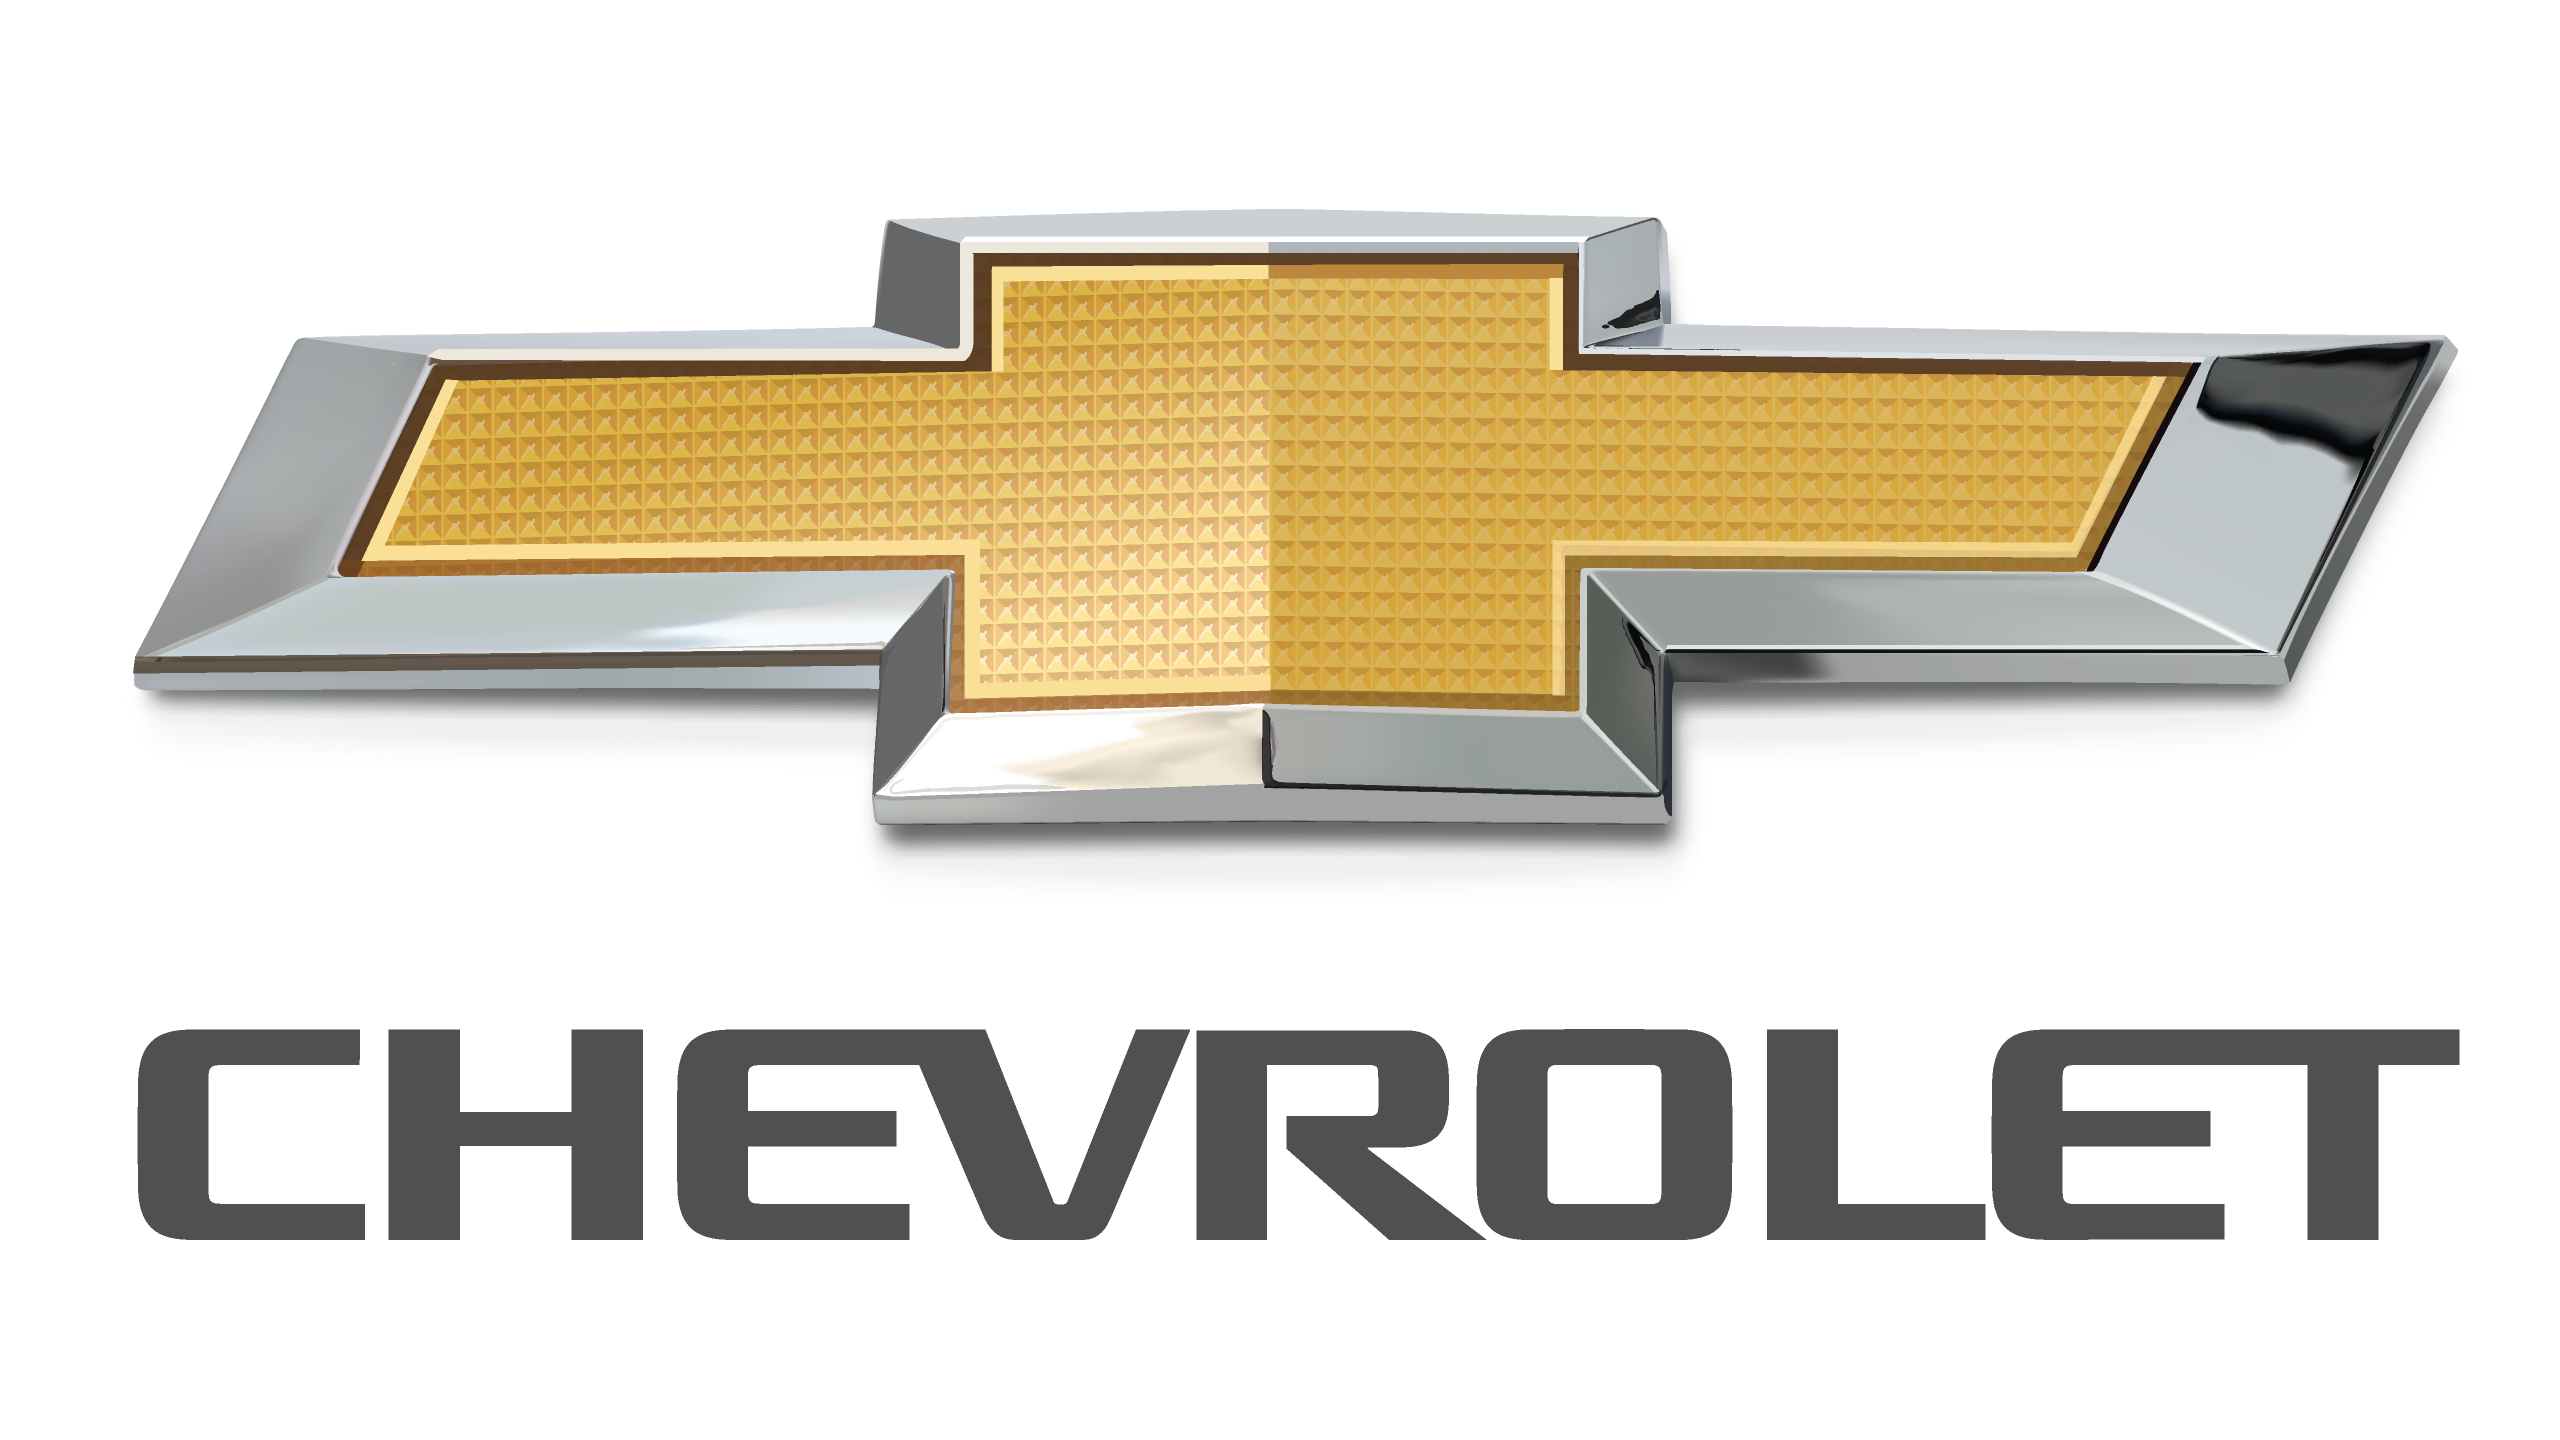 Chevrolet Logo, Hd Png, Meaning, Information, Chevrolet Logo PNG - Free PNG